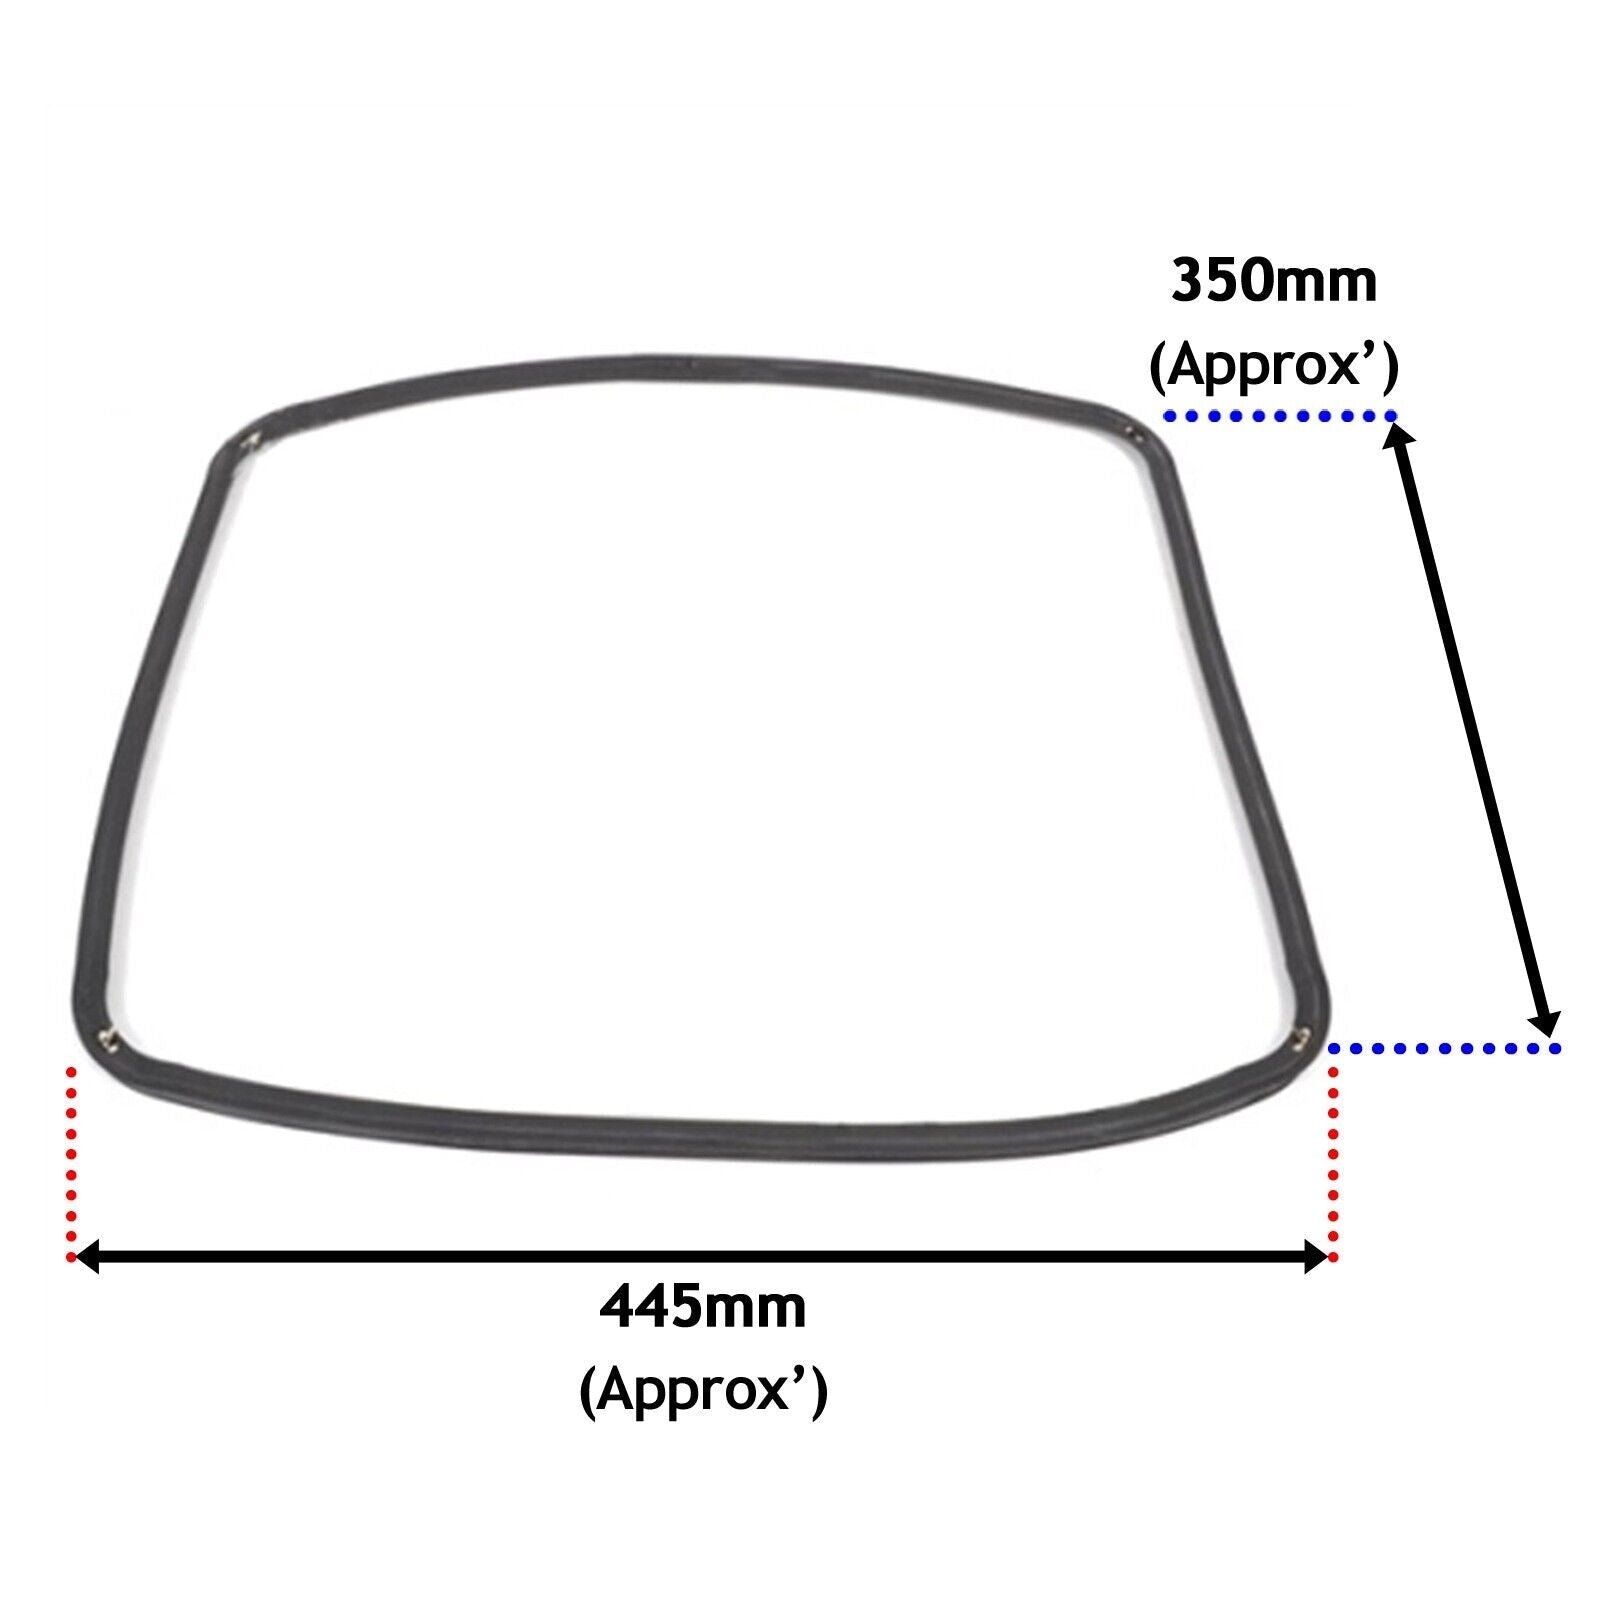 Door Seal for Cooke & Lewis CLFSB60 CSB60 CSB60A OVFO60 Main Oven Gasket